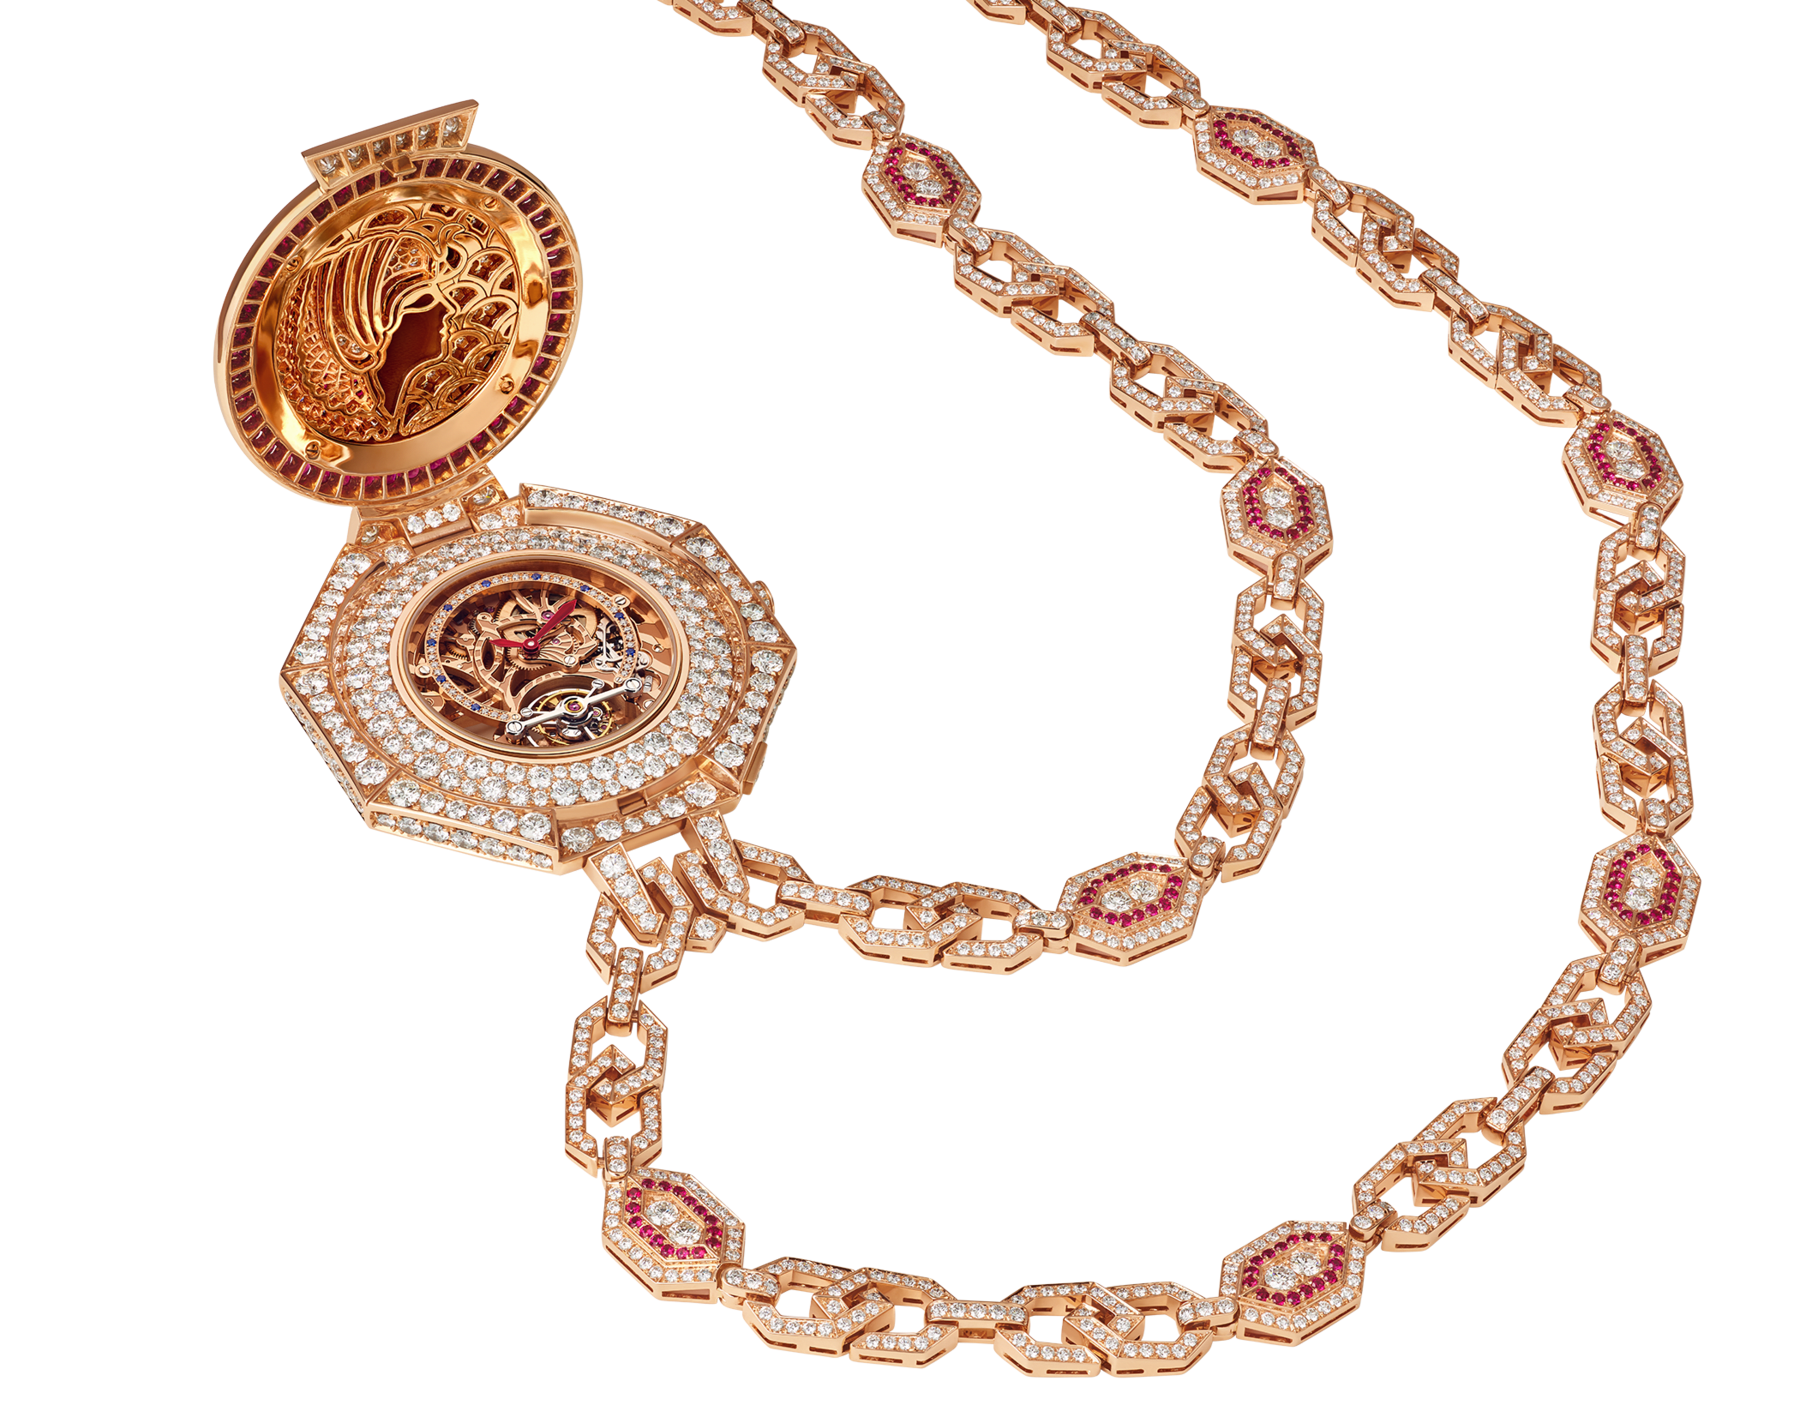 Secret Watch Necklace Cameo Imperiale with mechanical manufacture skeletonised movement, manual winding, tourbillon lumière, 18 kt rose gold case and chain set with rubies, diamonds, a Cleopatra Cameo with pink and blue sapphires, and snow-set diamond dial. 103670 image 1